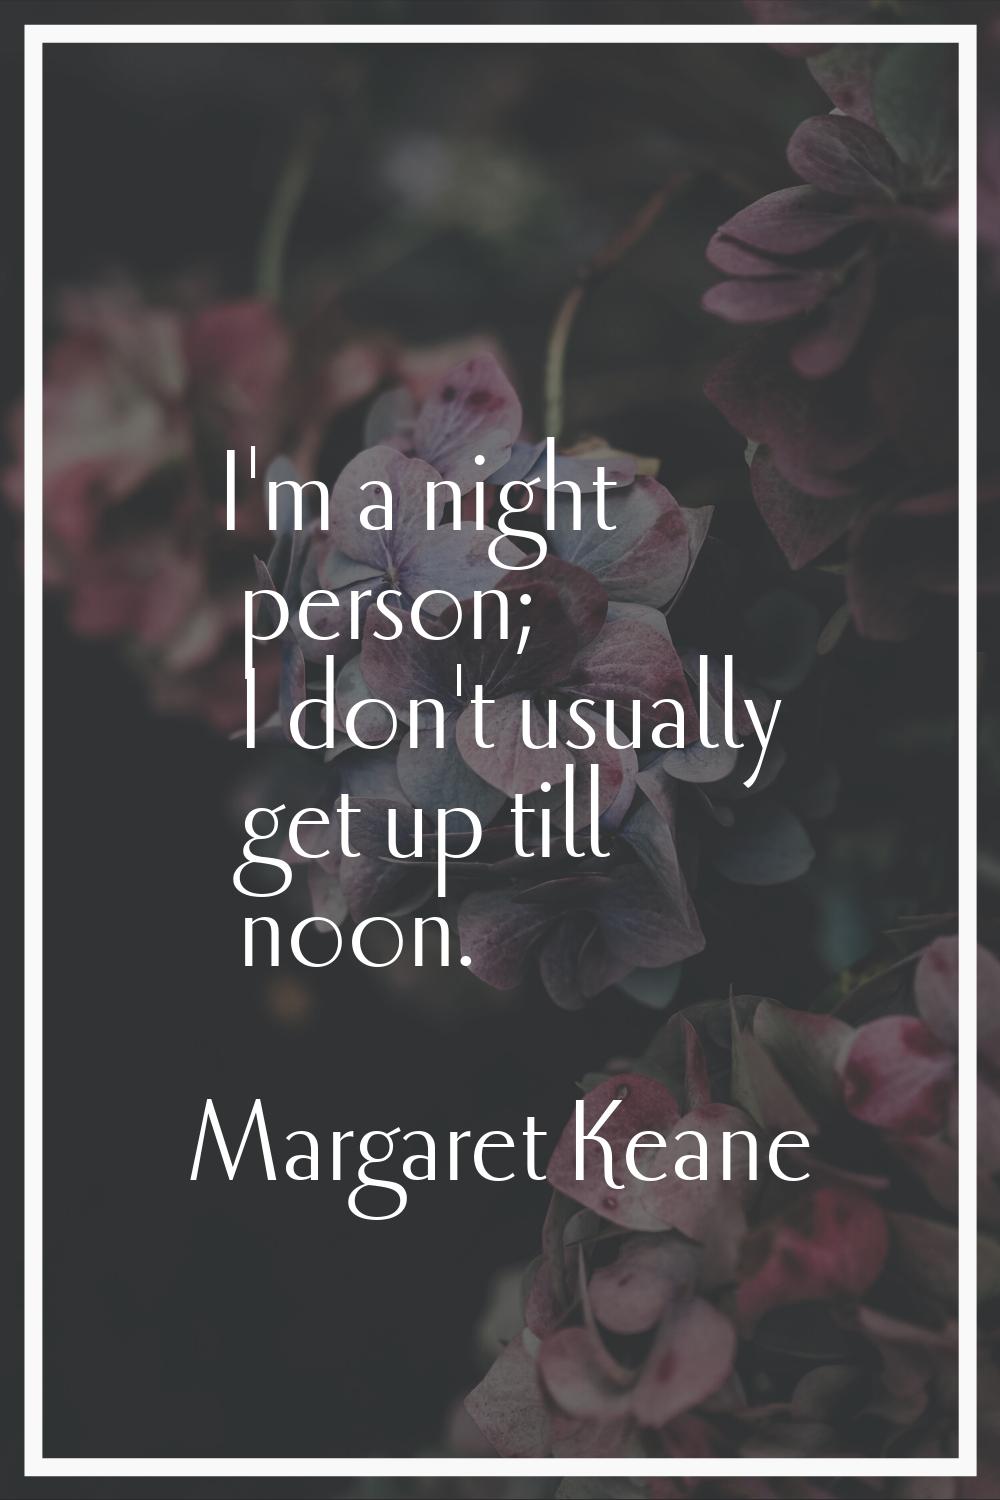 I'm a night person; I don't usually get up till noon.